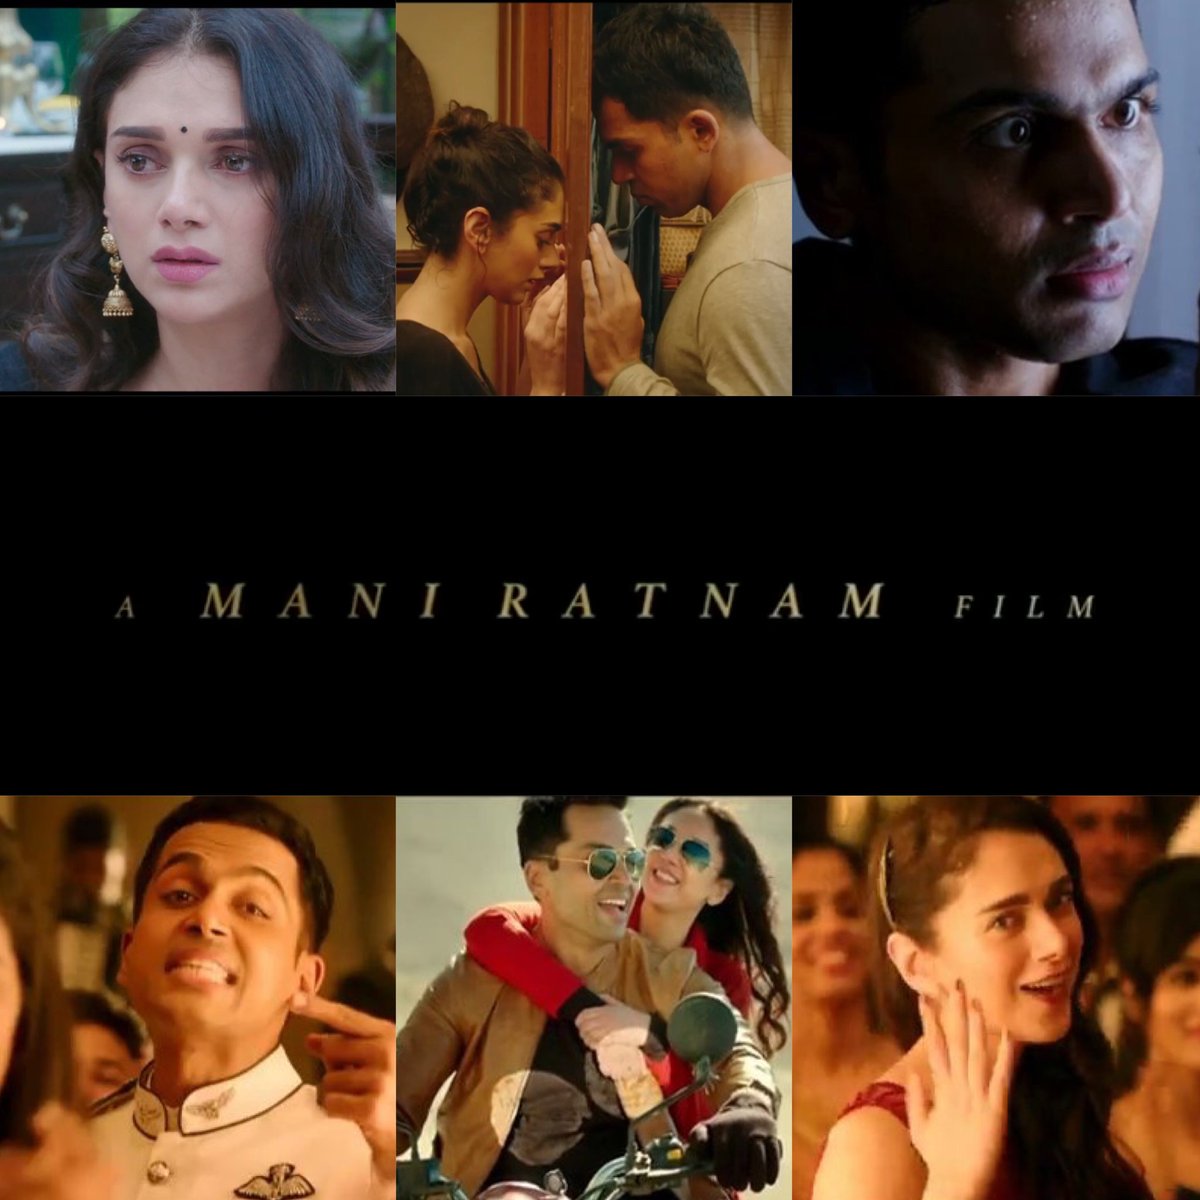  #3yearsofkaatruveliyidai #kaatruveliyidai This was my first  #Maniratnam movie in theatre that too on first day because I'm a  #karthi fan, eagerly waiting to see him in "A MANIRATNAM film" My expectations was super high 